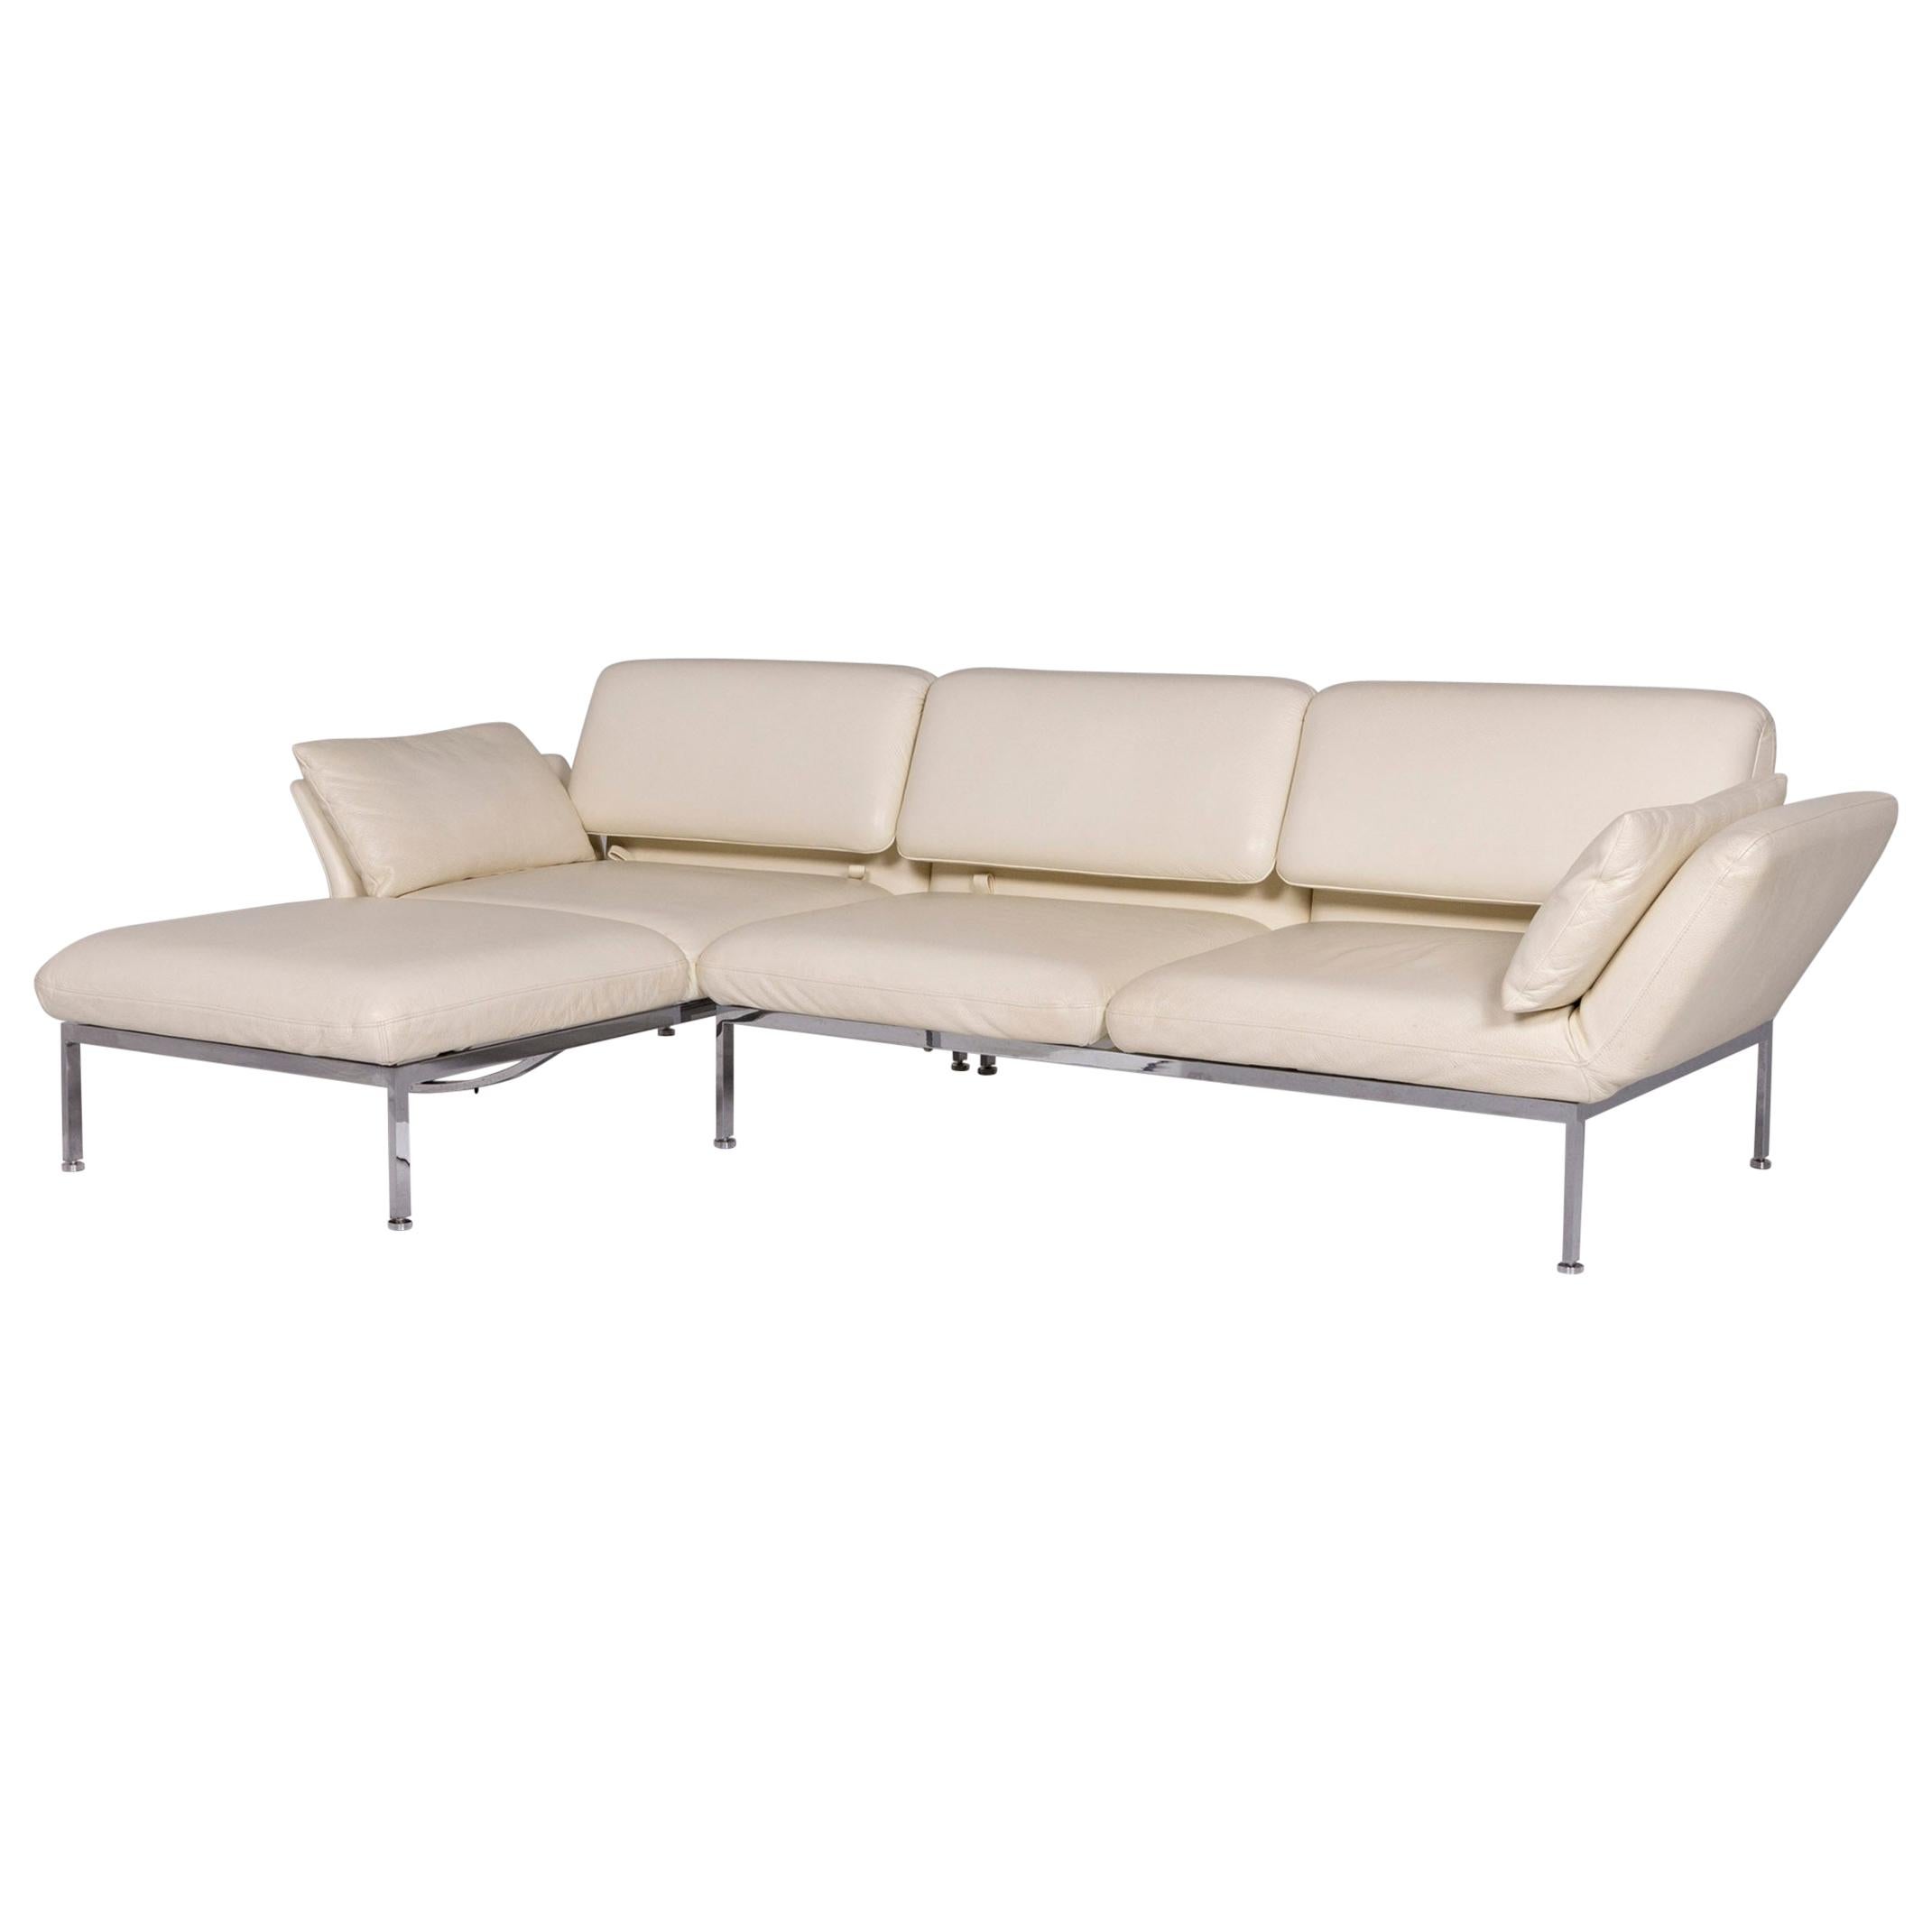 Brühl & Sippold Roro Leather Corner Sofa Cream Sofa Function Relax Function For Sale